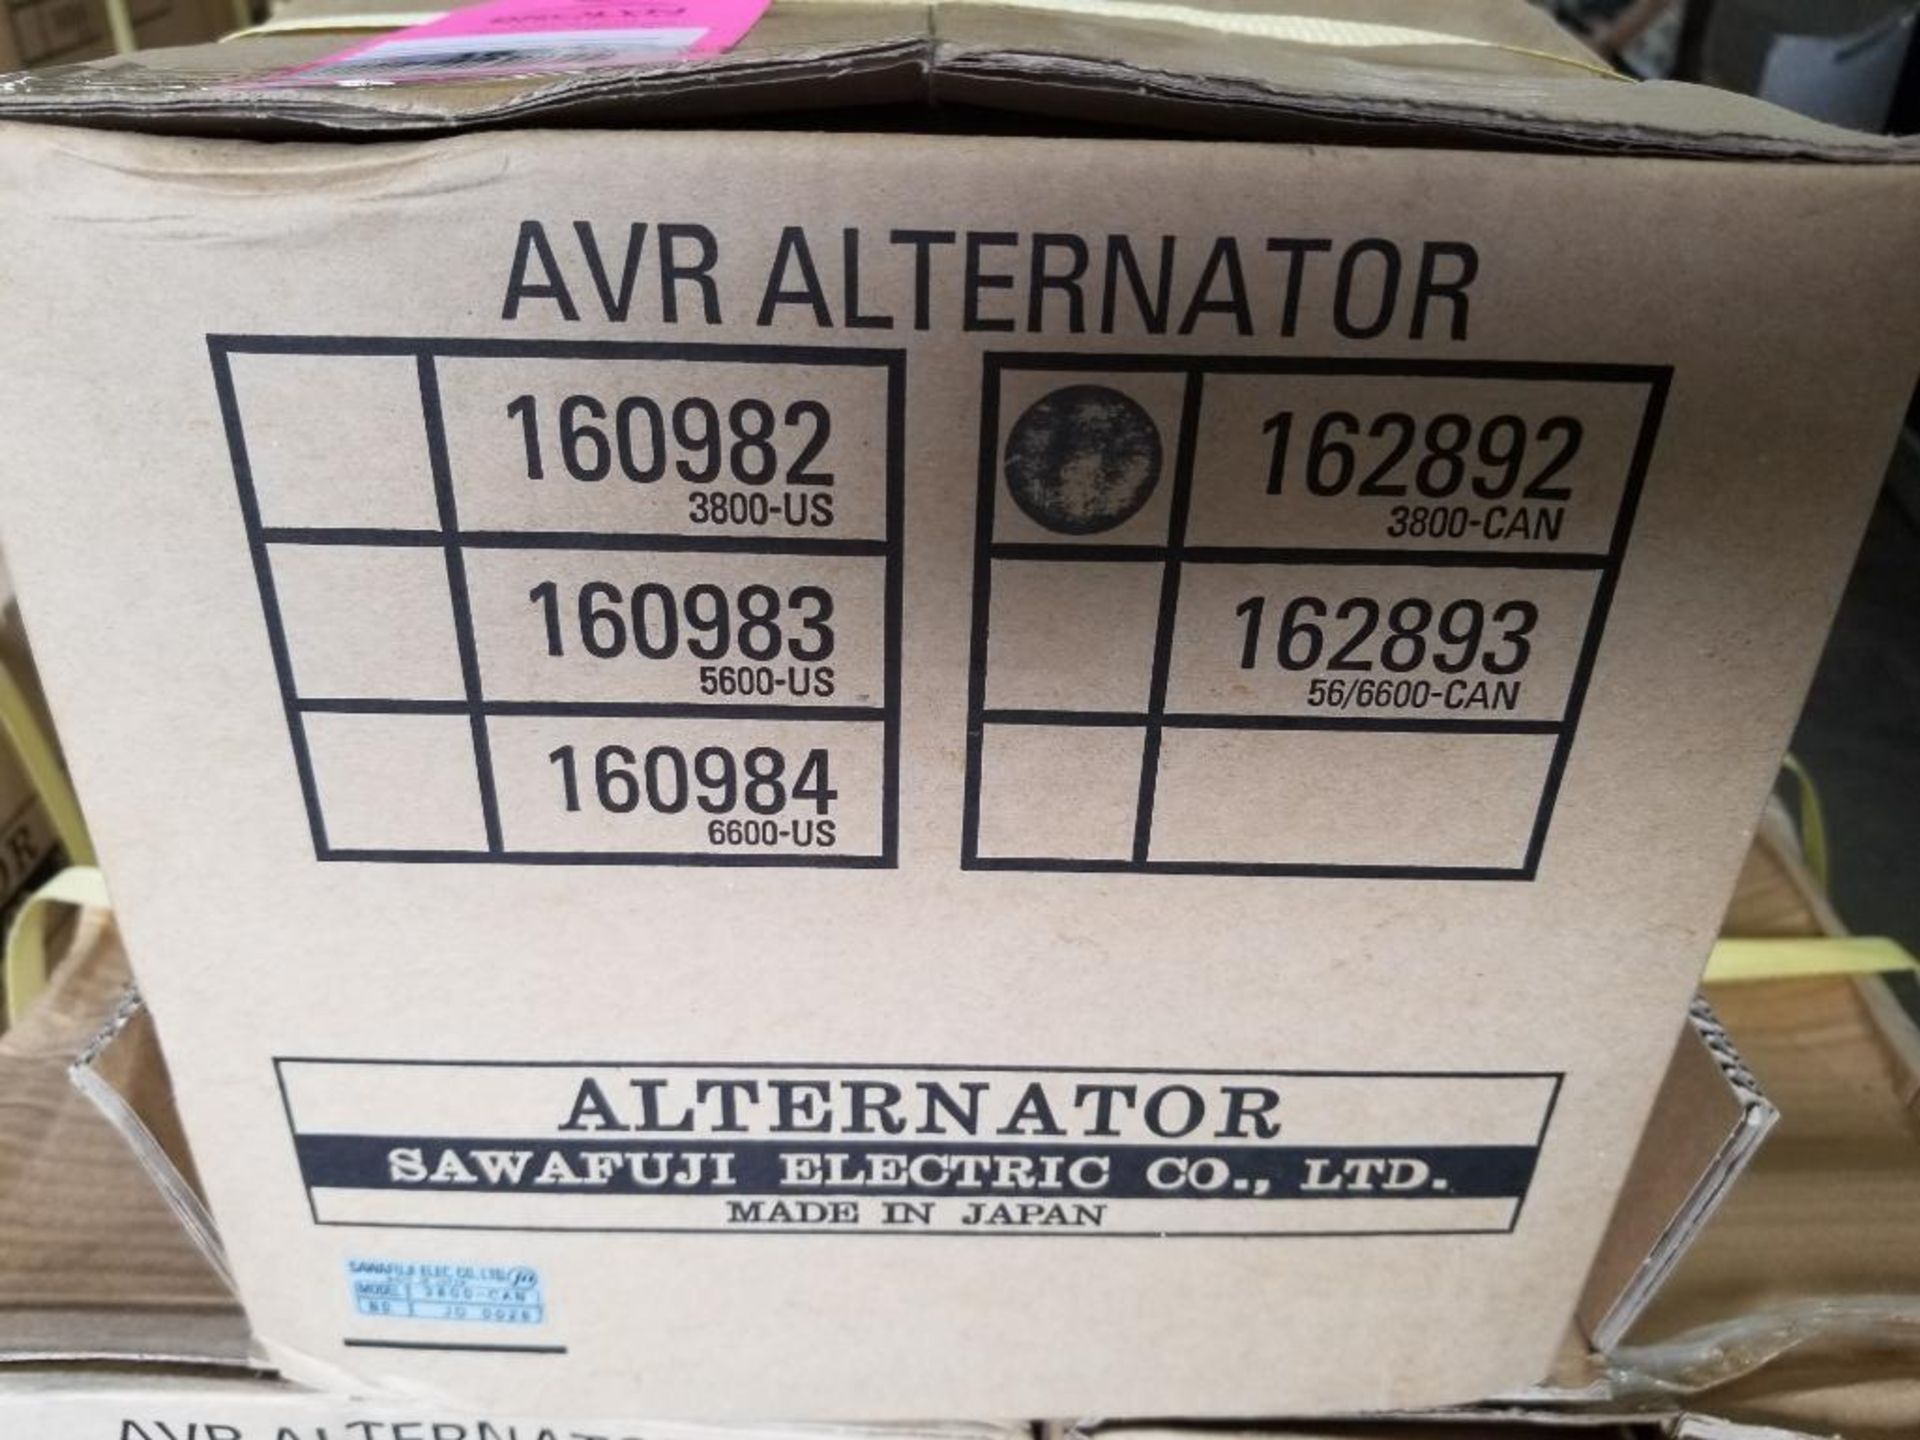 Qty 3 - Sawafuji Alternator model 162892. 3800-CAN generator head. New in boxes as pictured. - Image 2 of 2